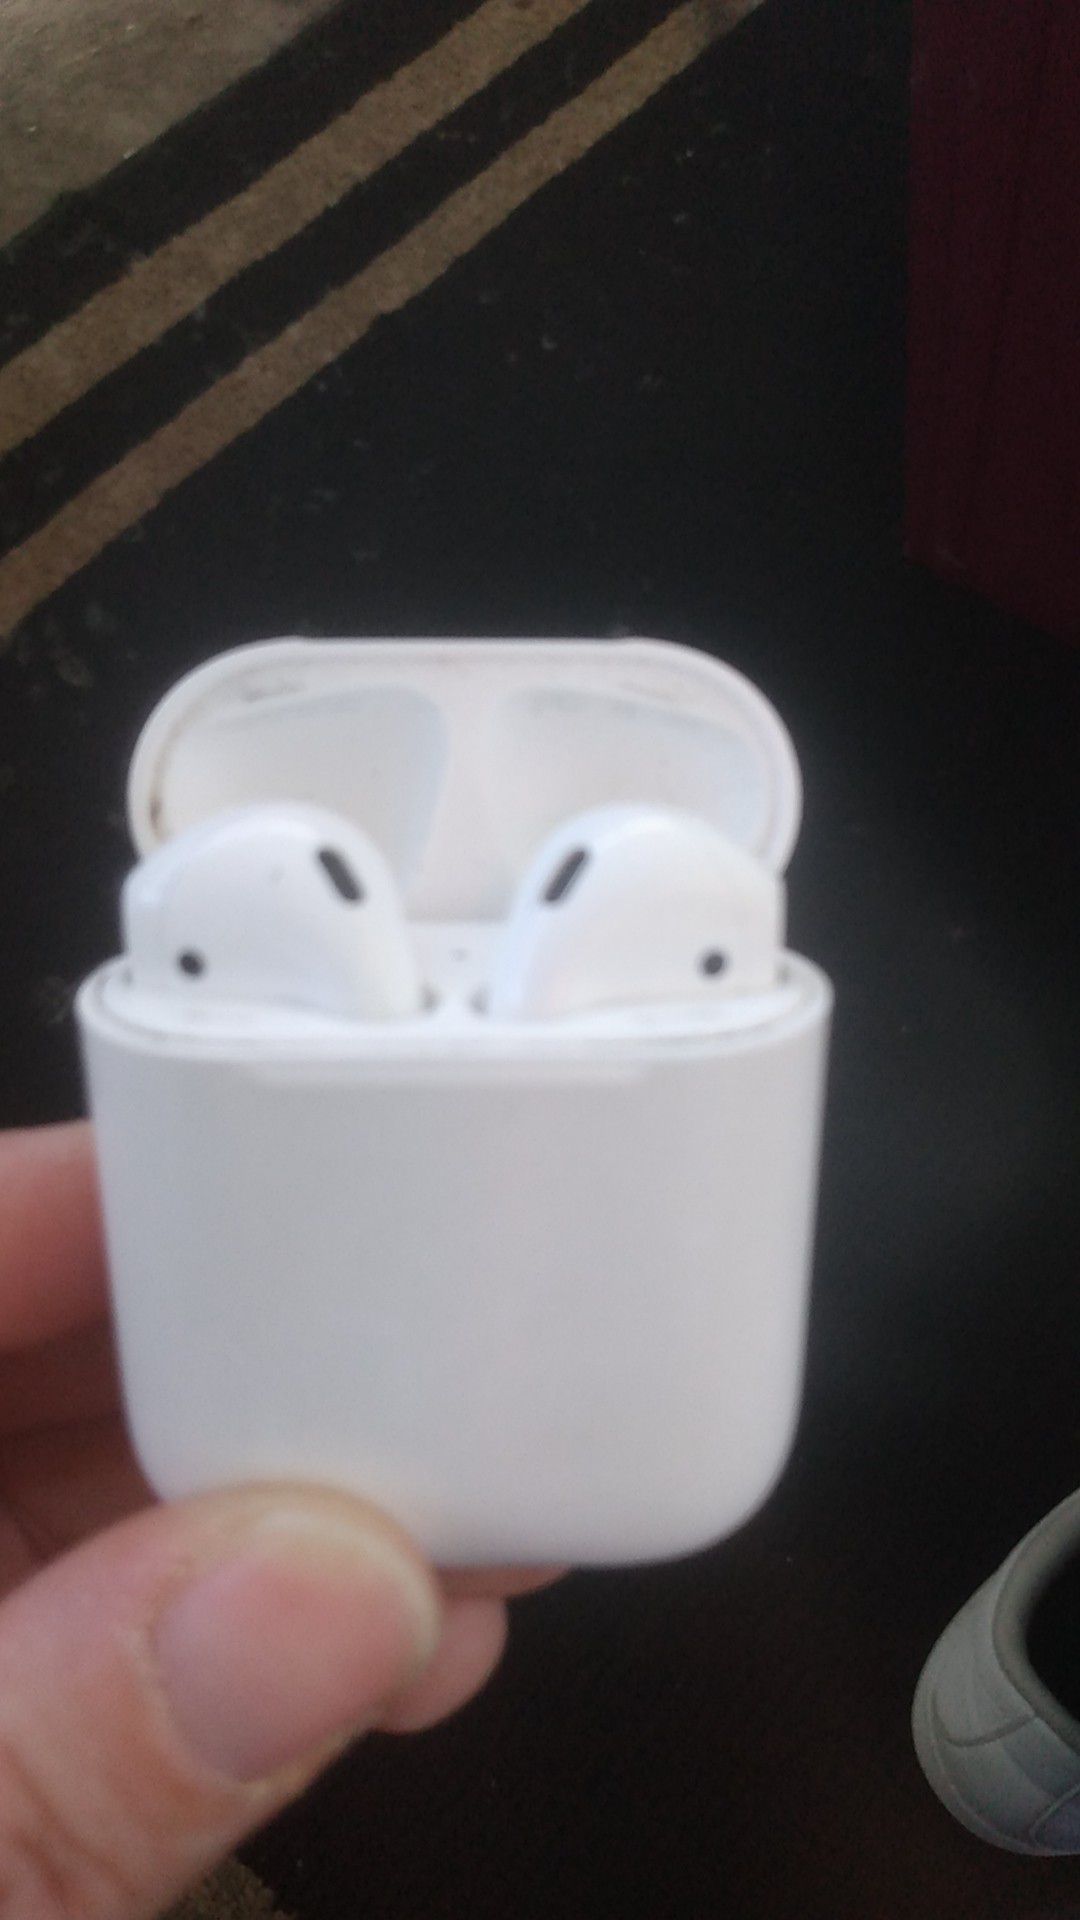 Apple Air Pods for sale $50. Also comes with Apple IPod Touch all together $65